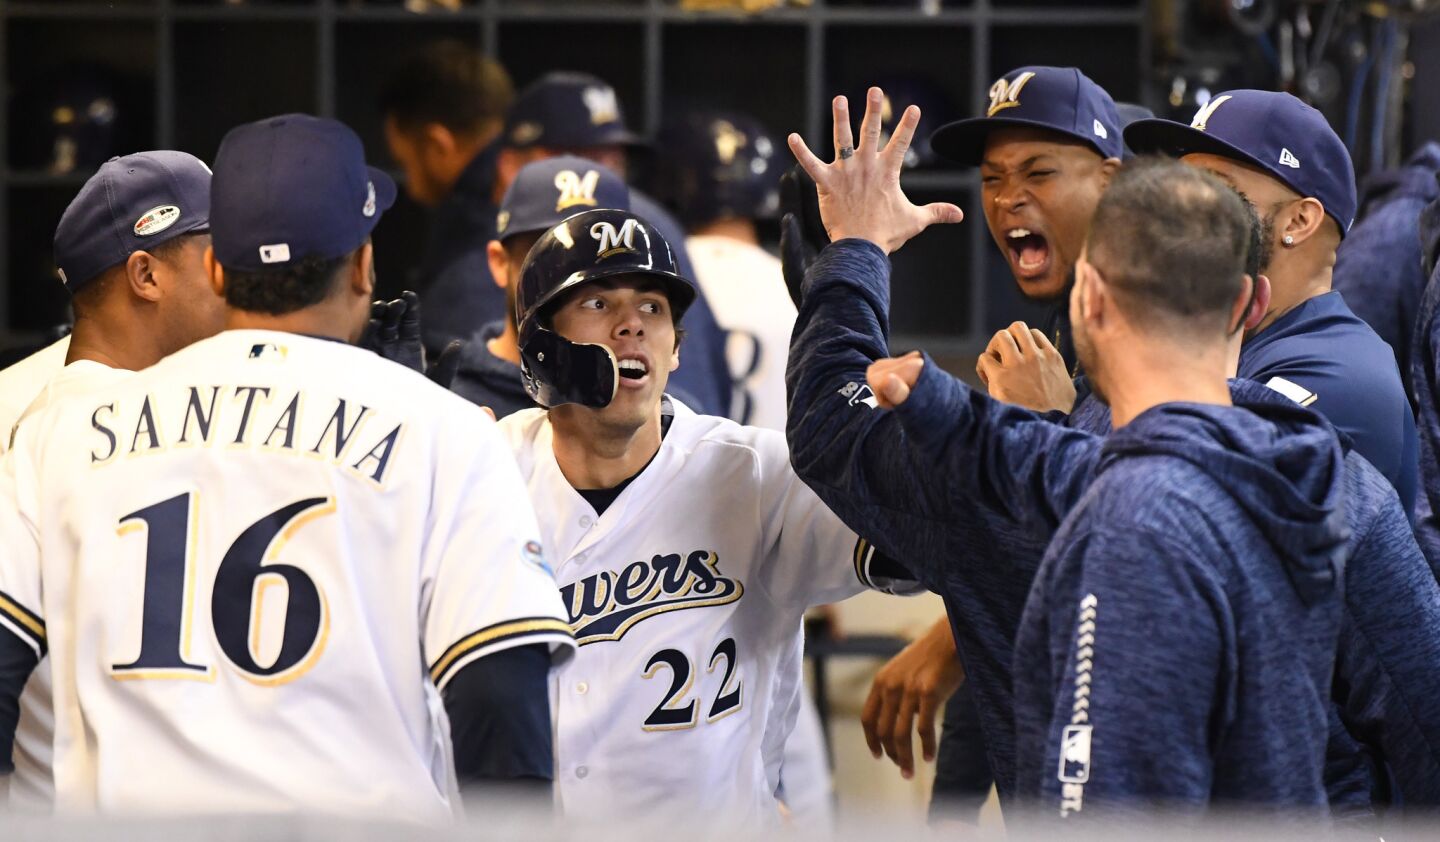 Milwaukee Brewers Christian Yelich celebrates in the dugout after hitting a solo homerun in the first inning.